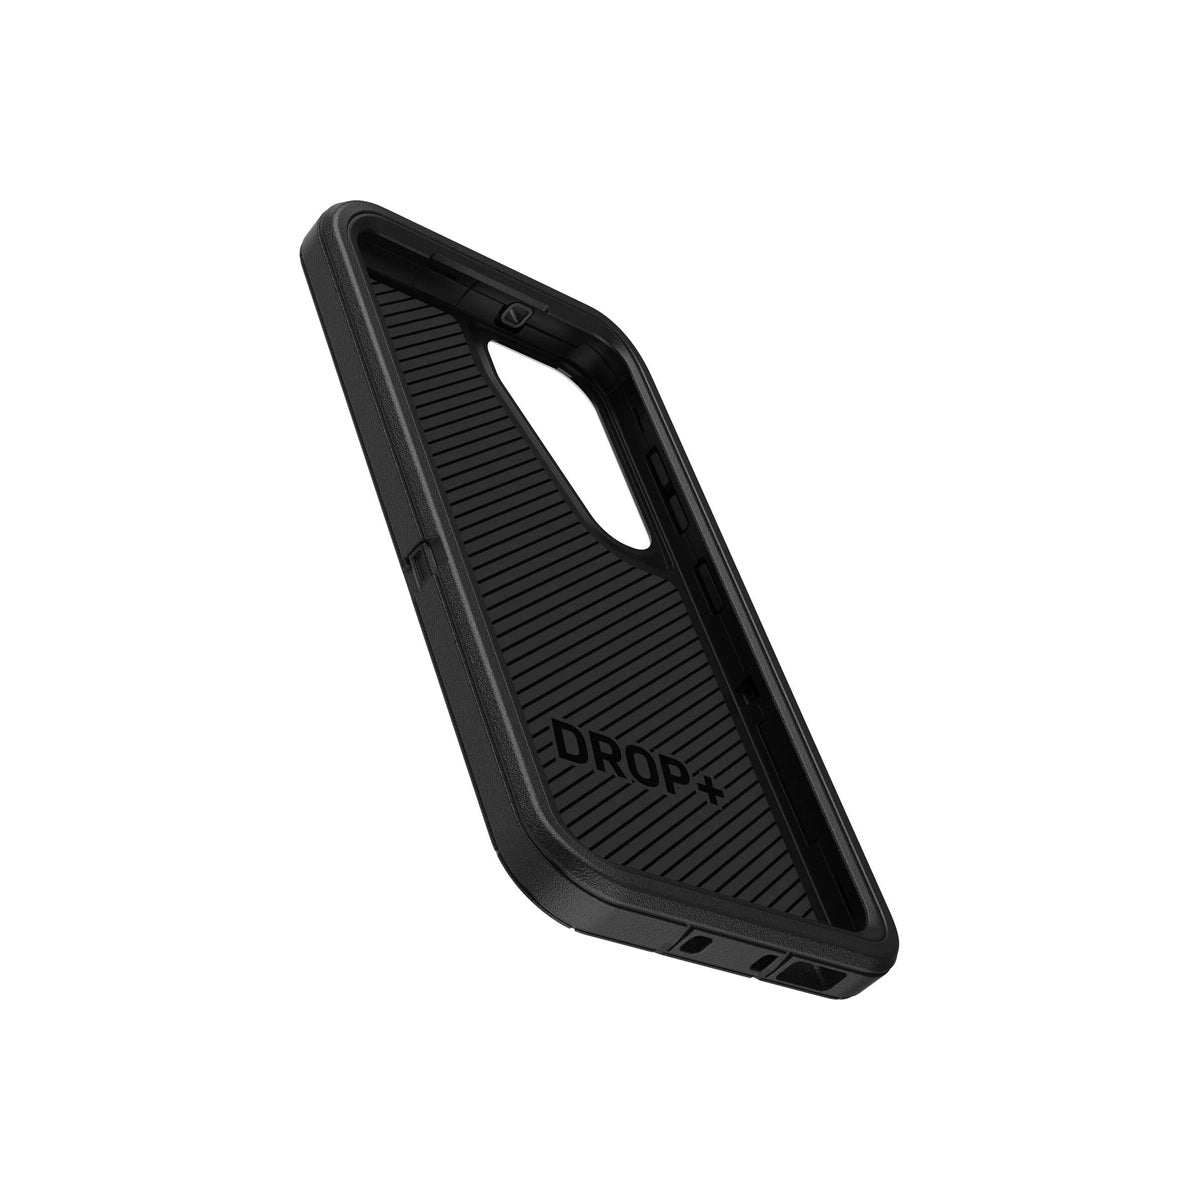 Otterbox Defender Series Phone Case for Samsung Galaxy S23.